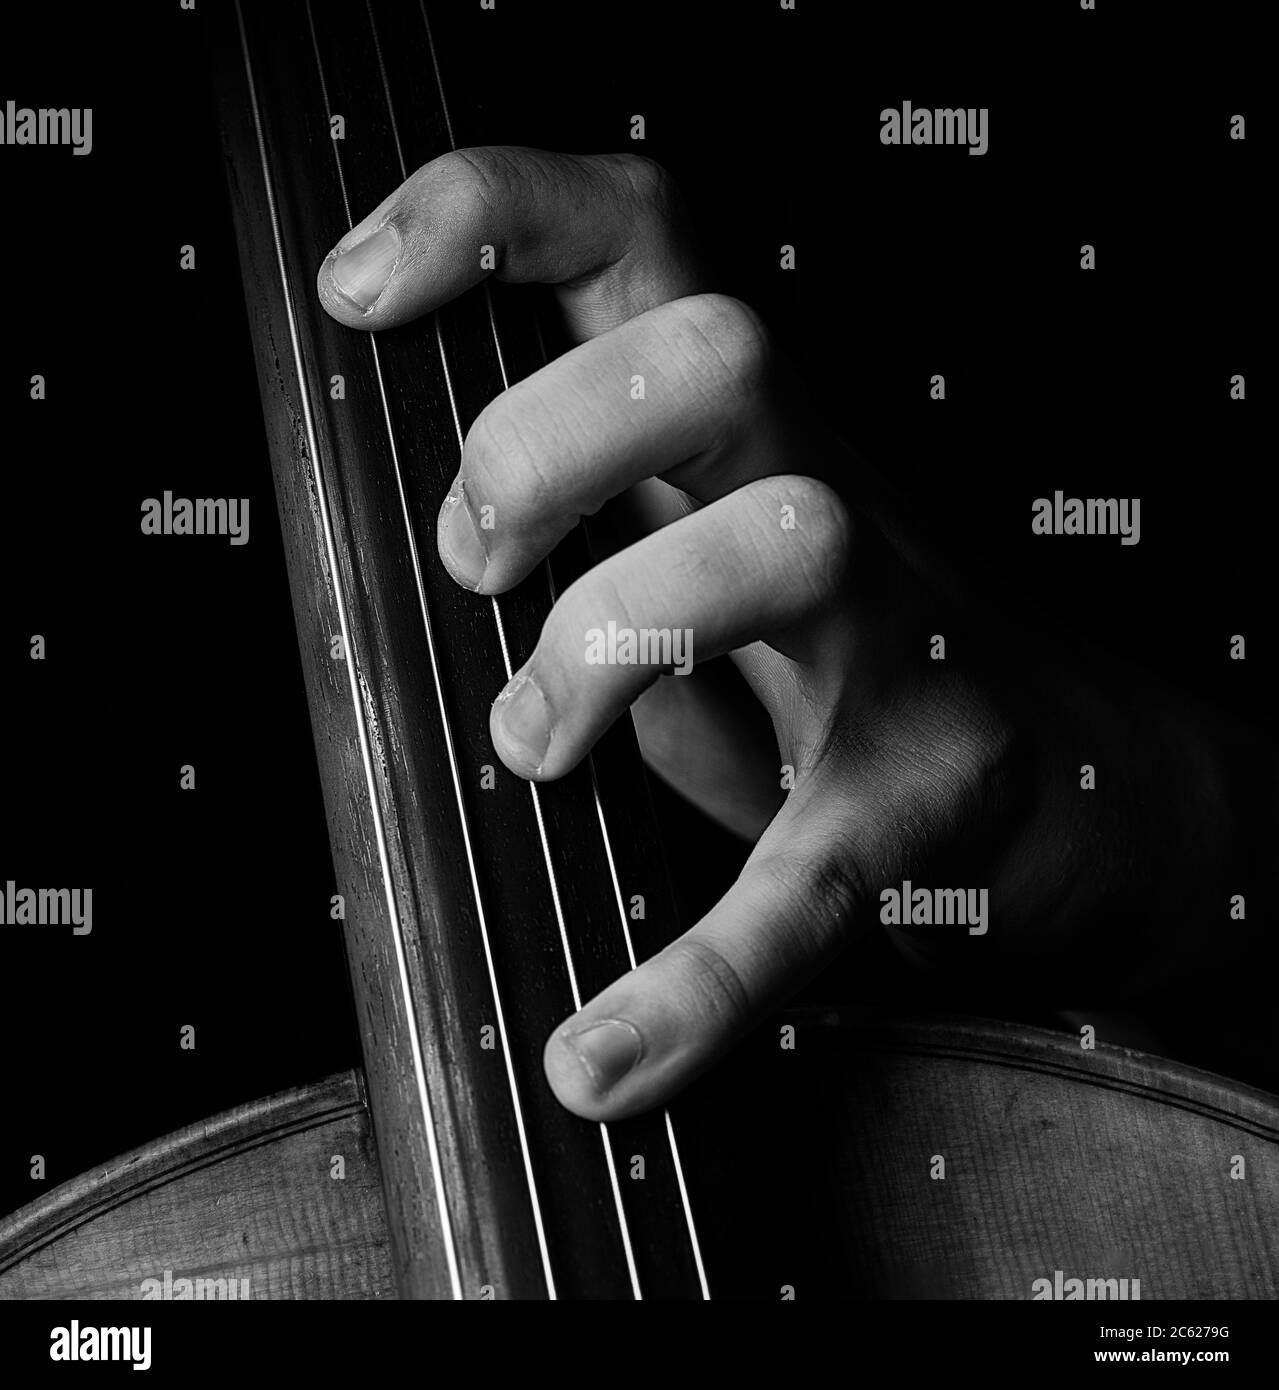 A young cellist practices classical music Stock Photo